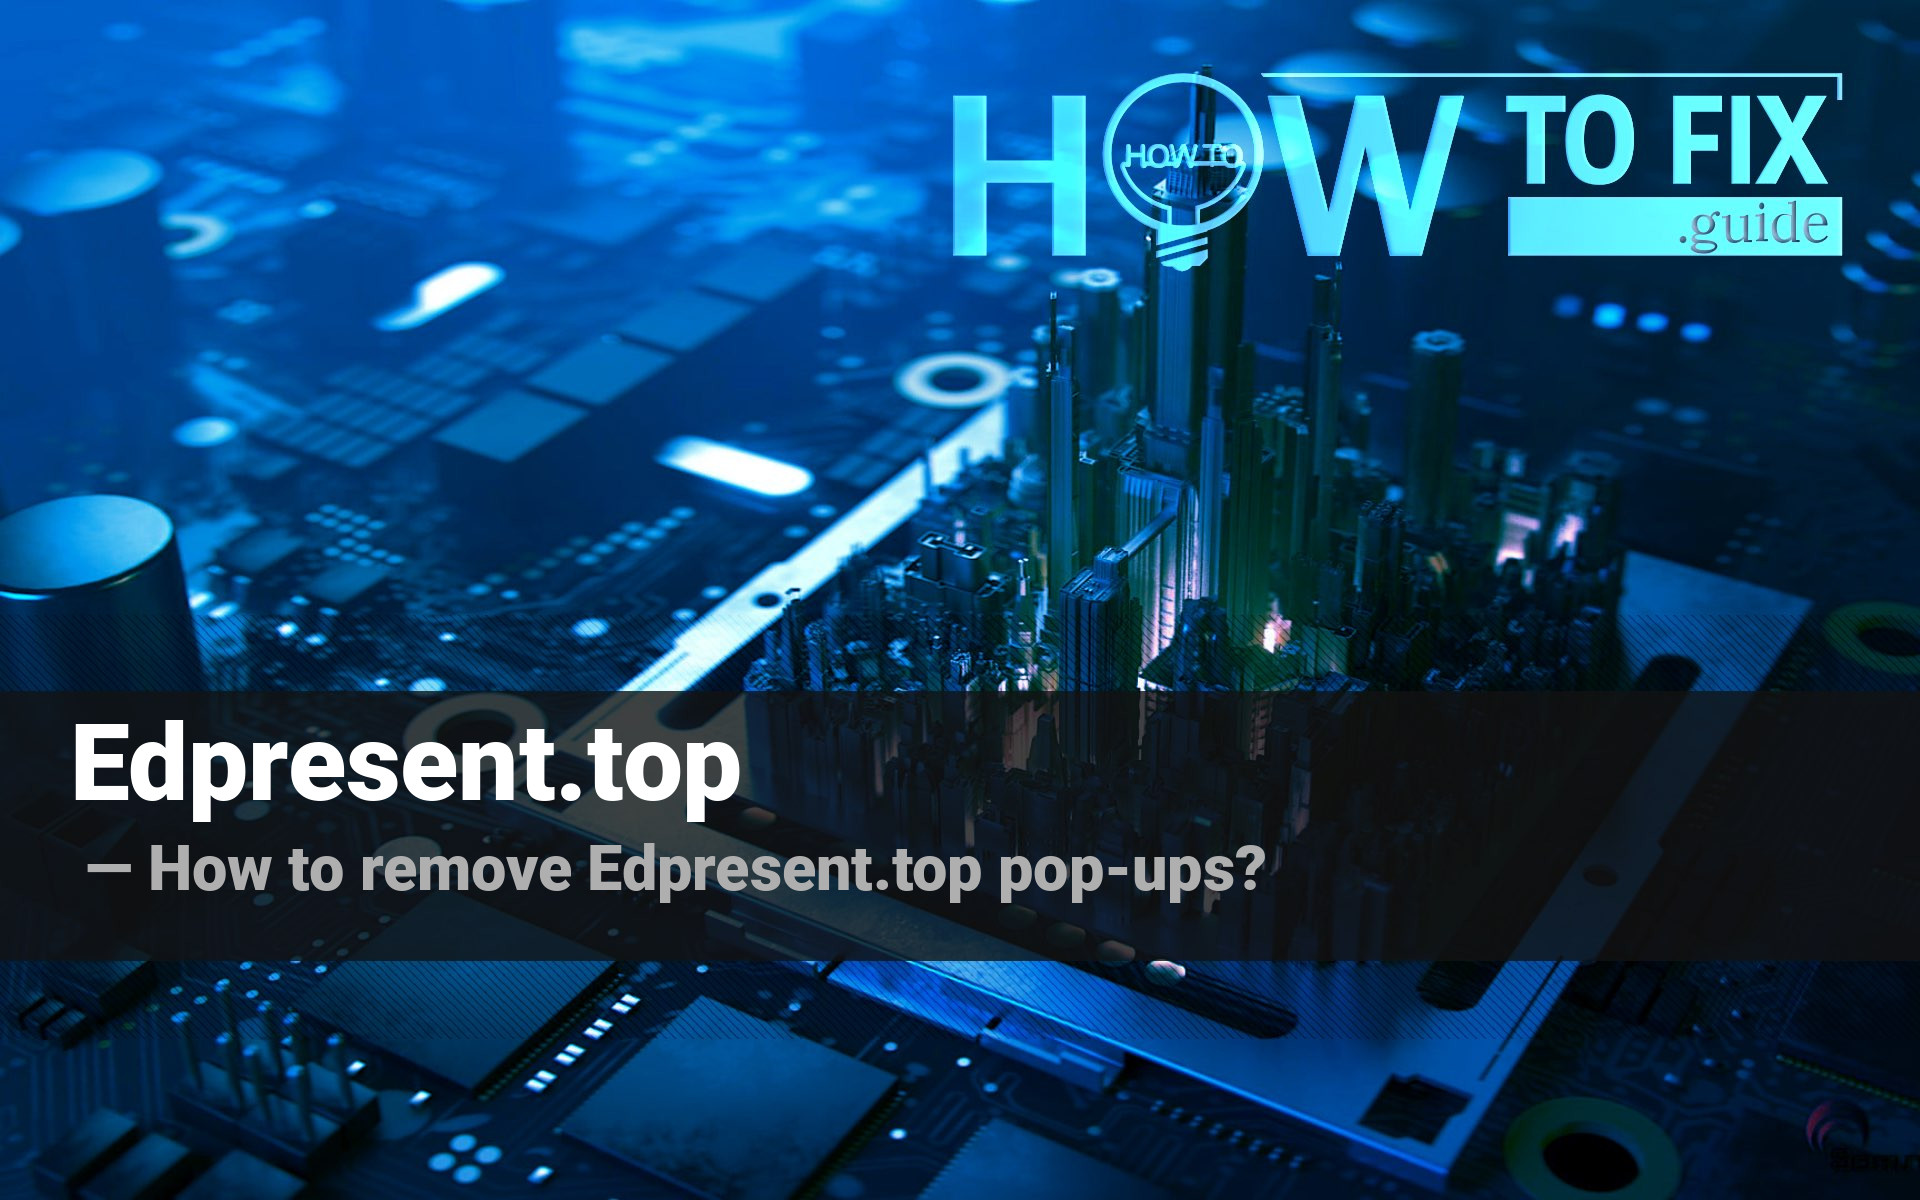 Remove Edpresent.top Popup Ads — How to Fix Gude